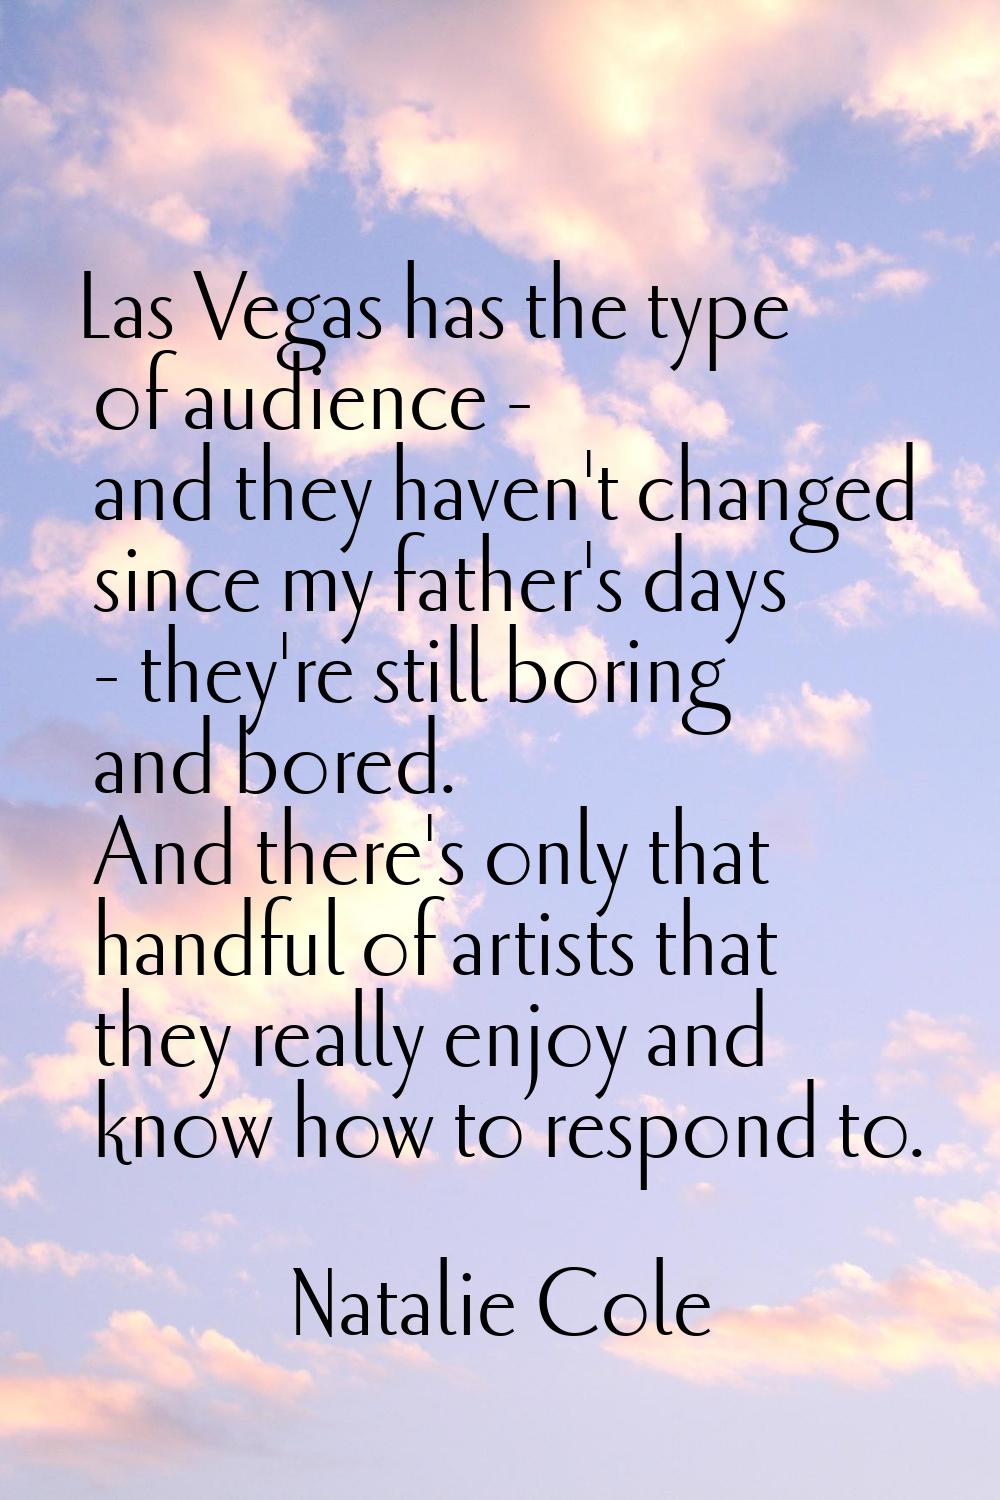 Las Vegas has the type of audience - and they haven't changed since my father's days - they're stil